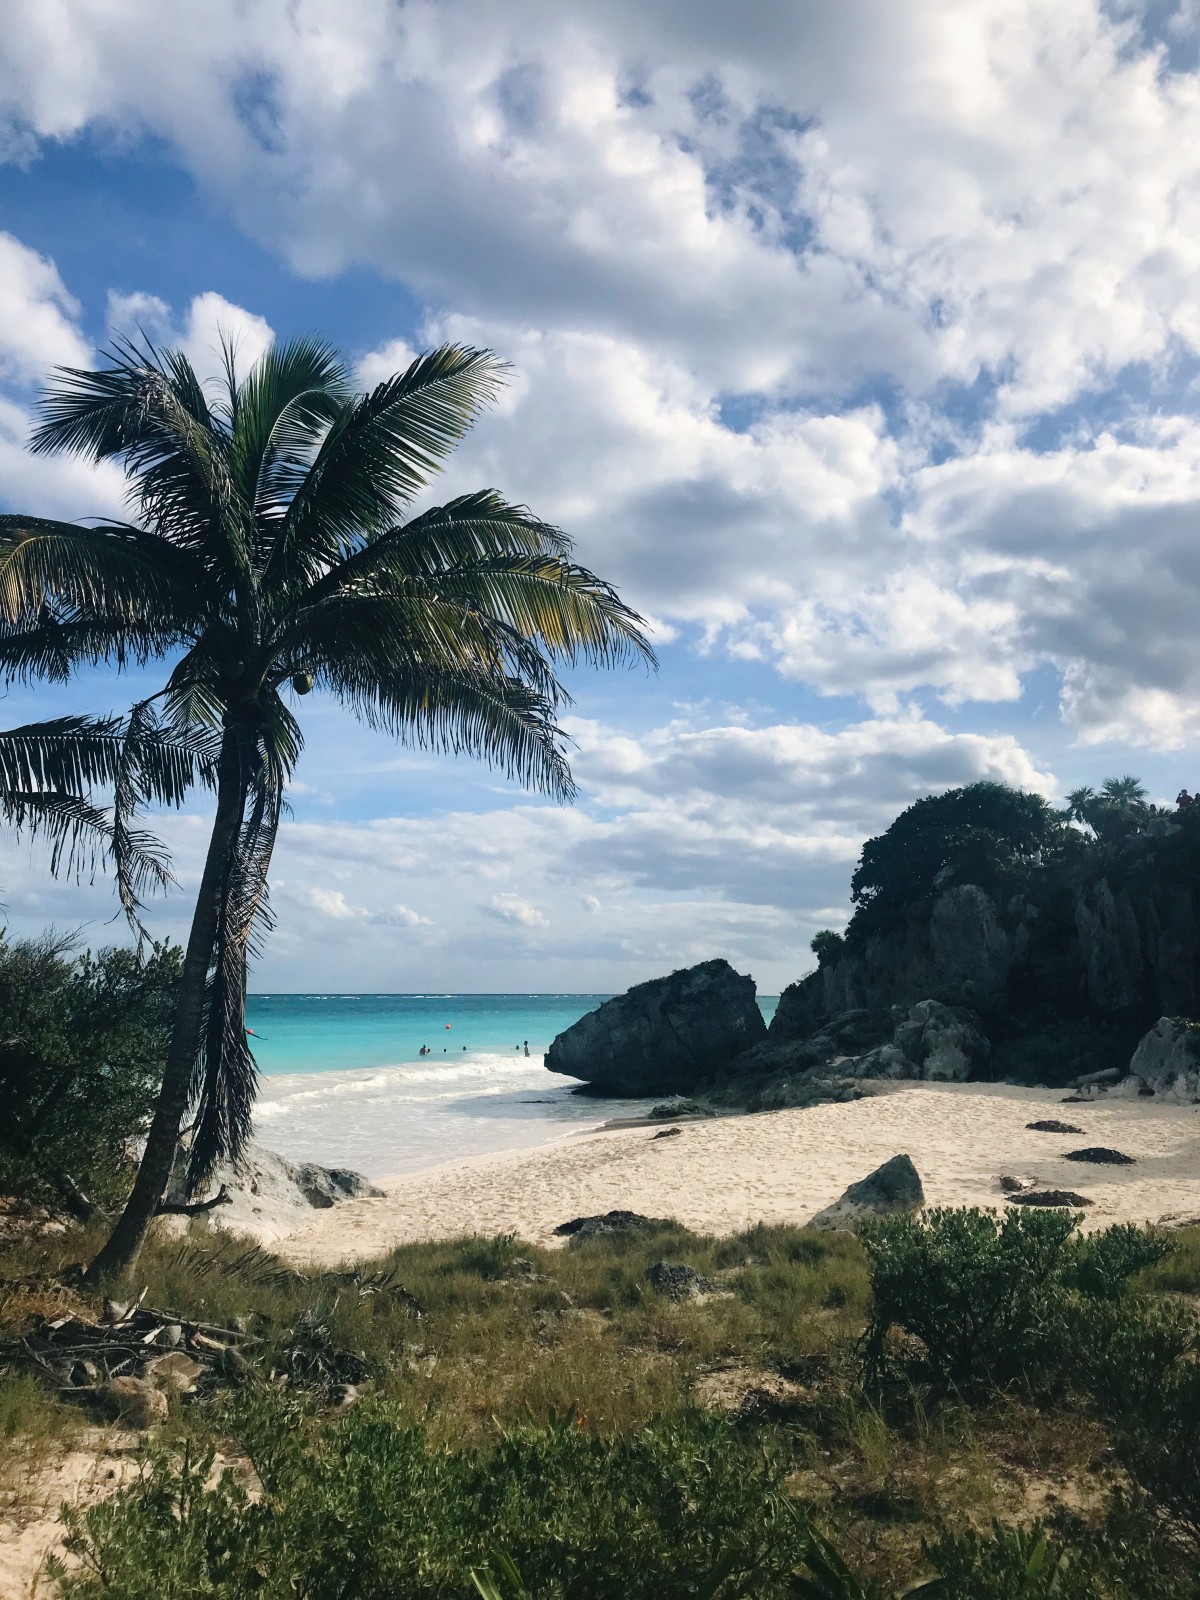 10 Days in Tulum: Travel Guide and Vlog